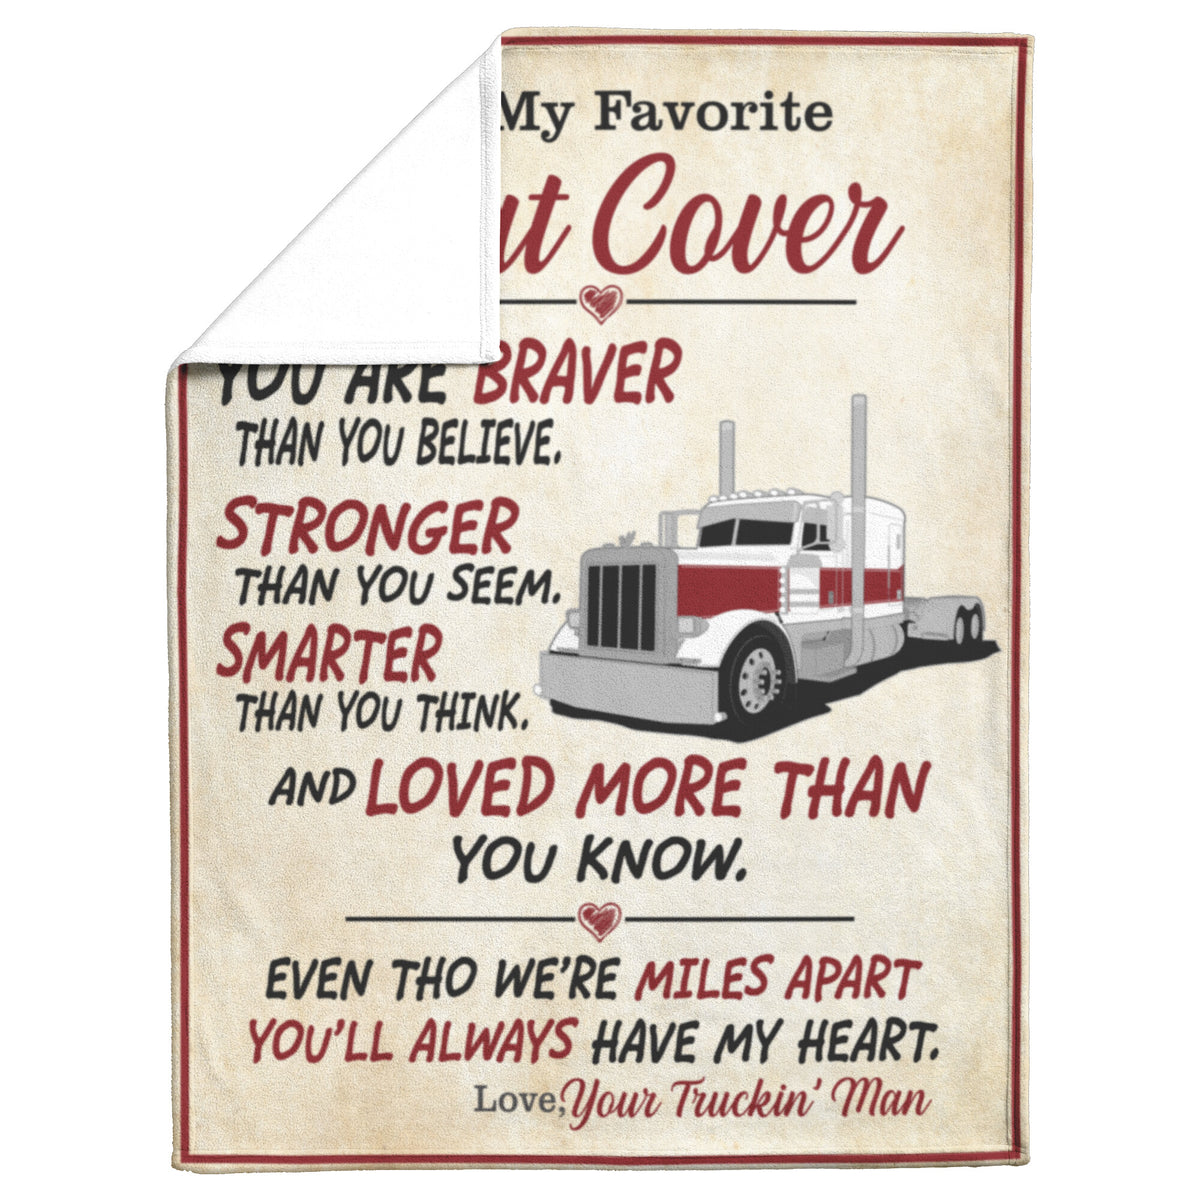 To My Favorite Seat Cover - Blanket - Peterbilt - Free Shipping